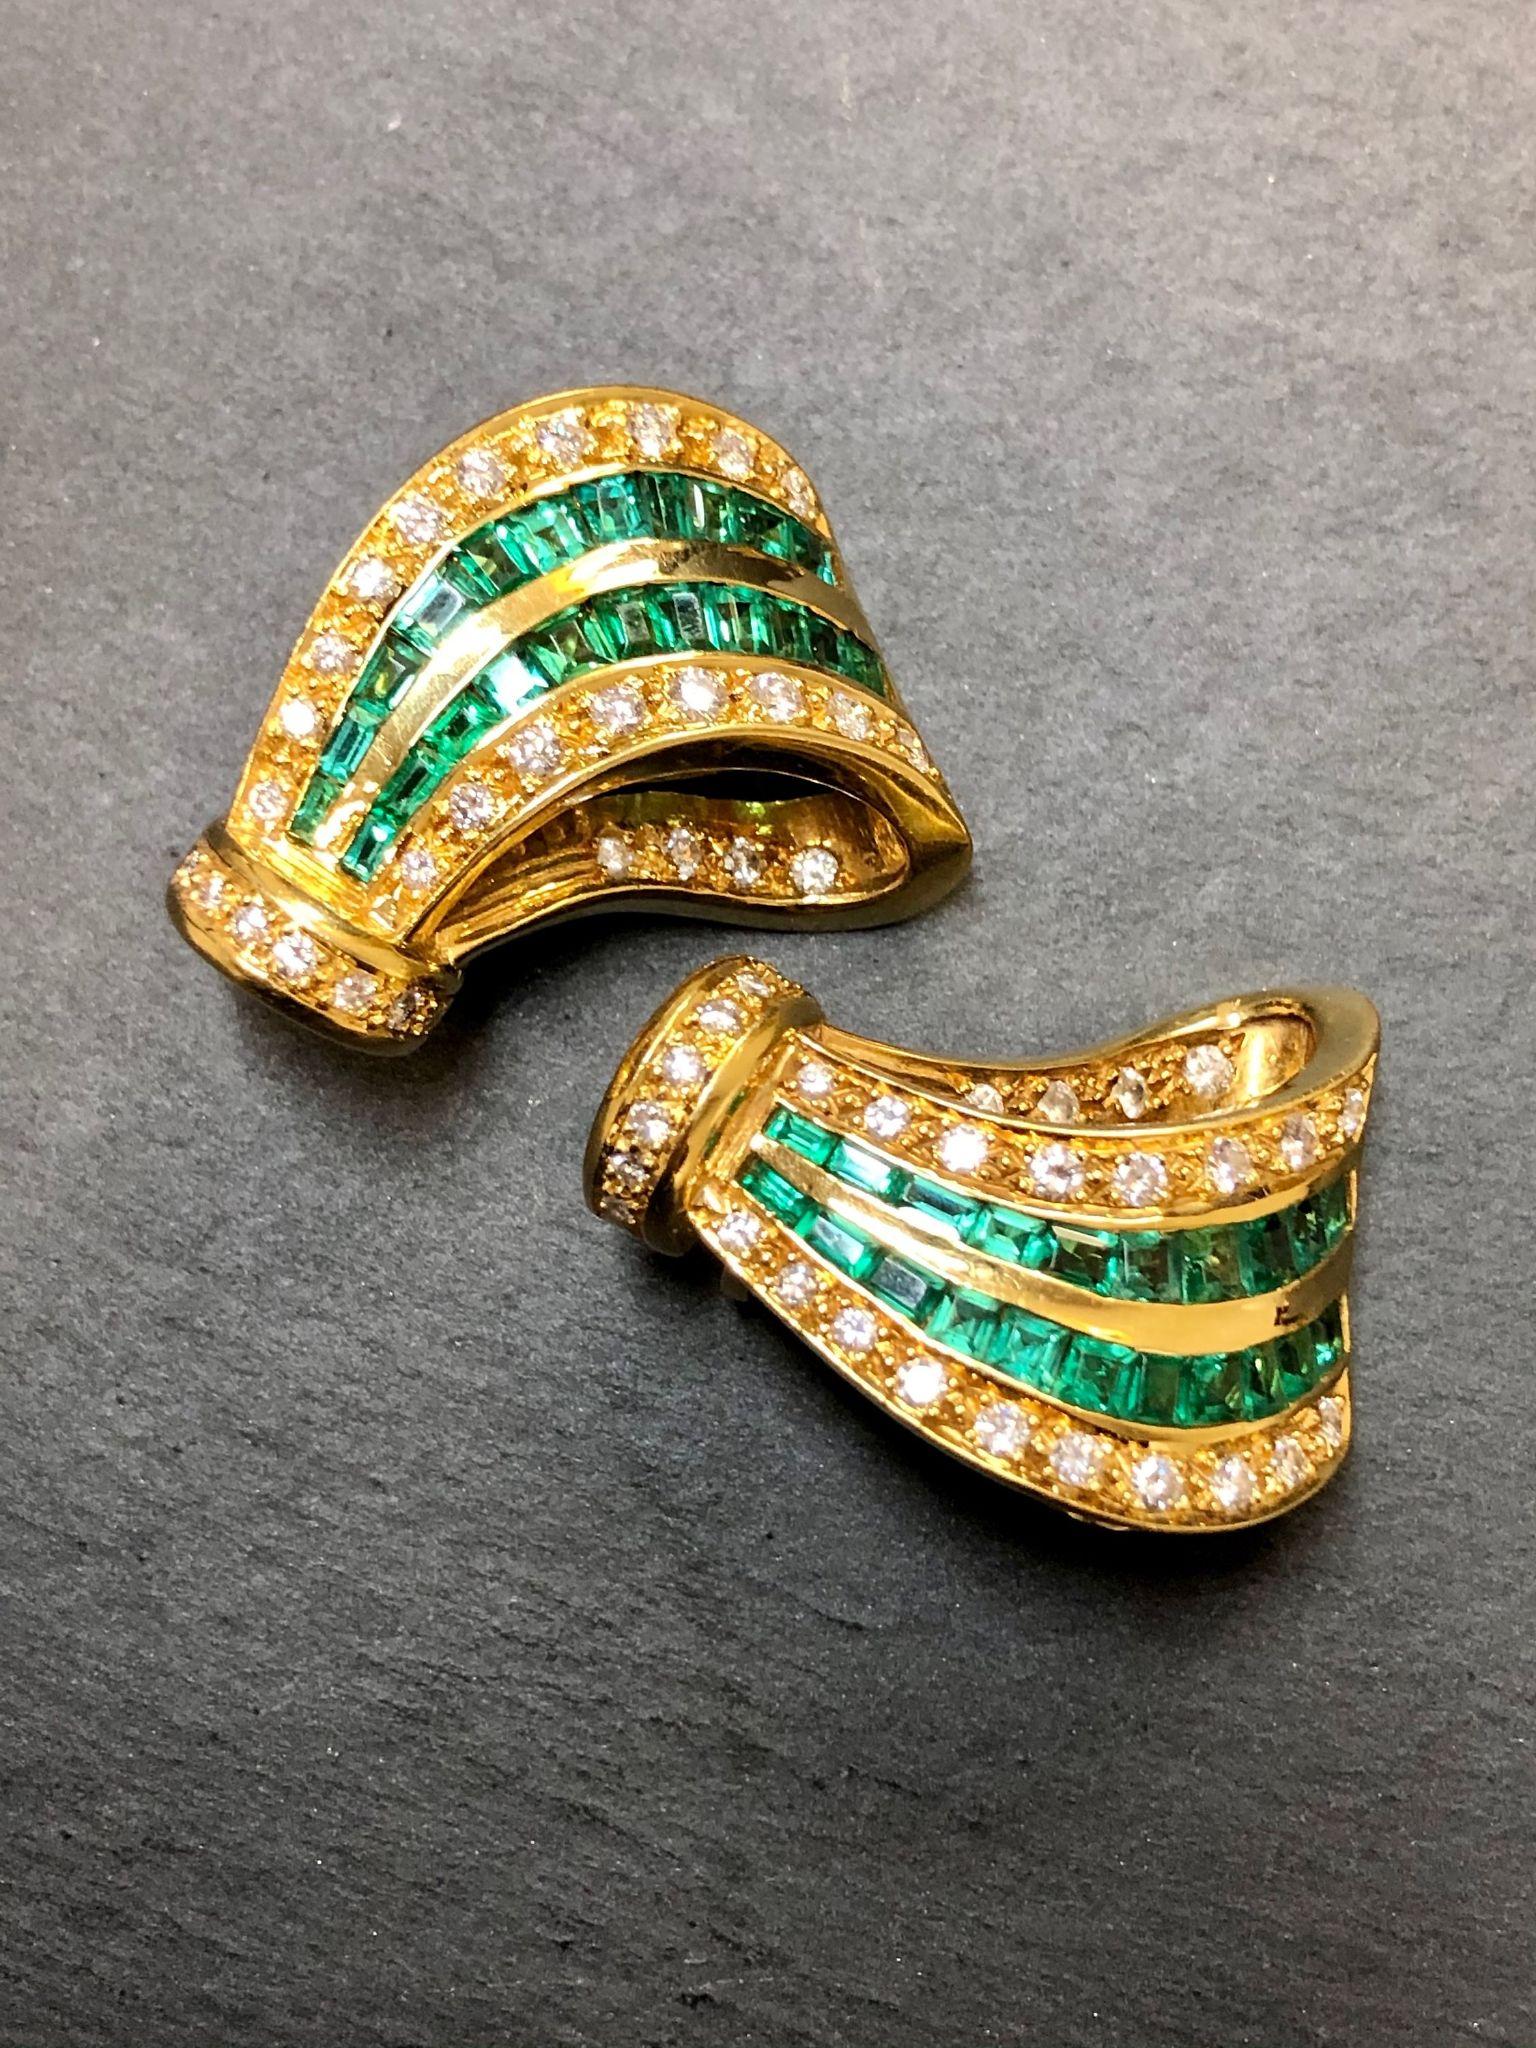 A unique pair of handmade earrings done in 18K yellow gold and set with approximately 1.60cttw in G-H color Vs1-Si1 clarity diamonds as well as approximately 4.50cttw in amazing, minty green and eye-clean natural square